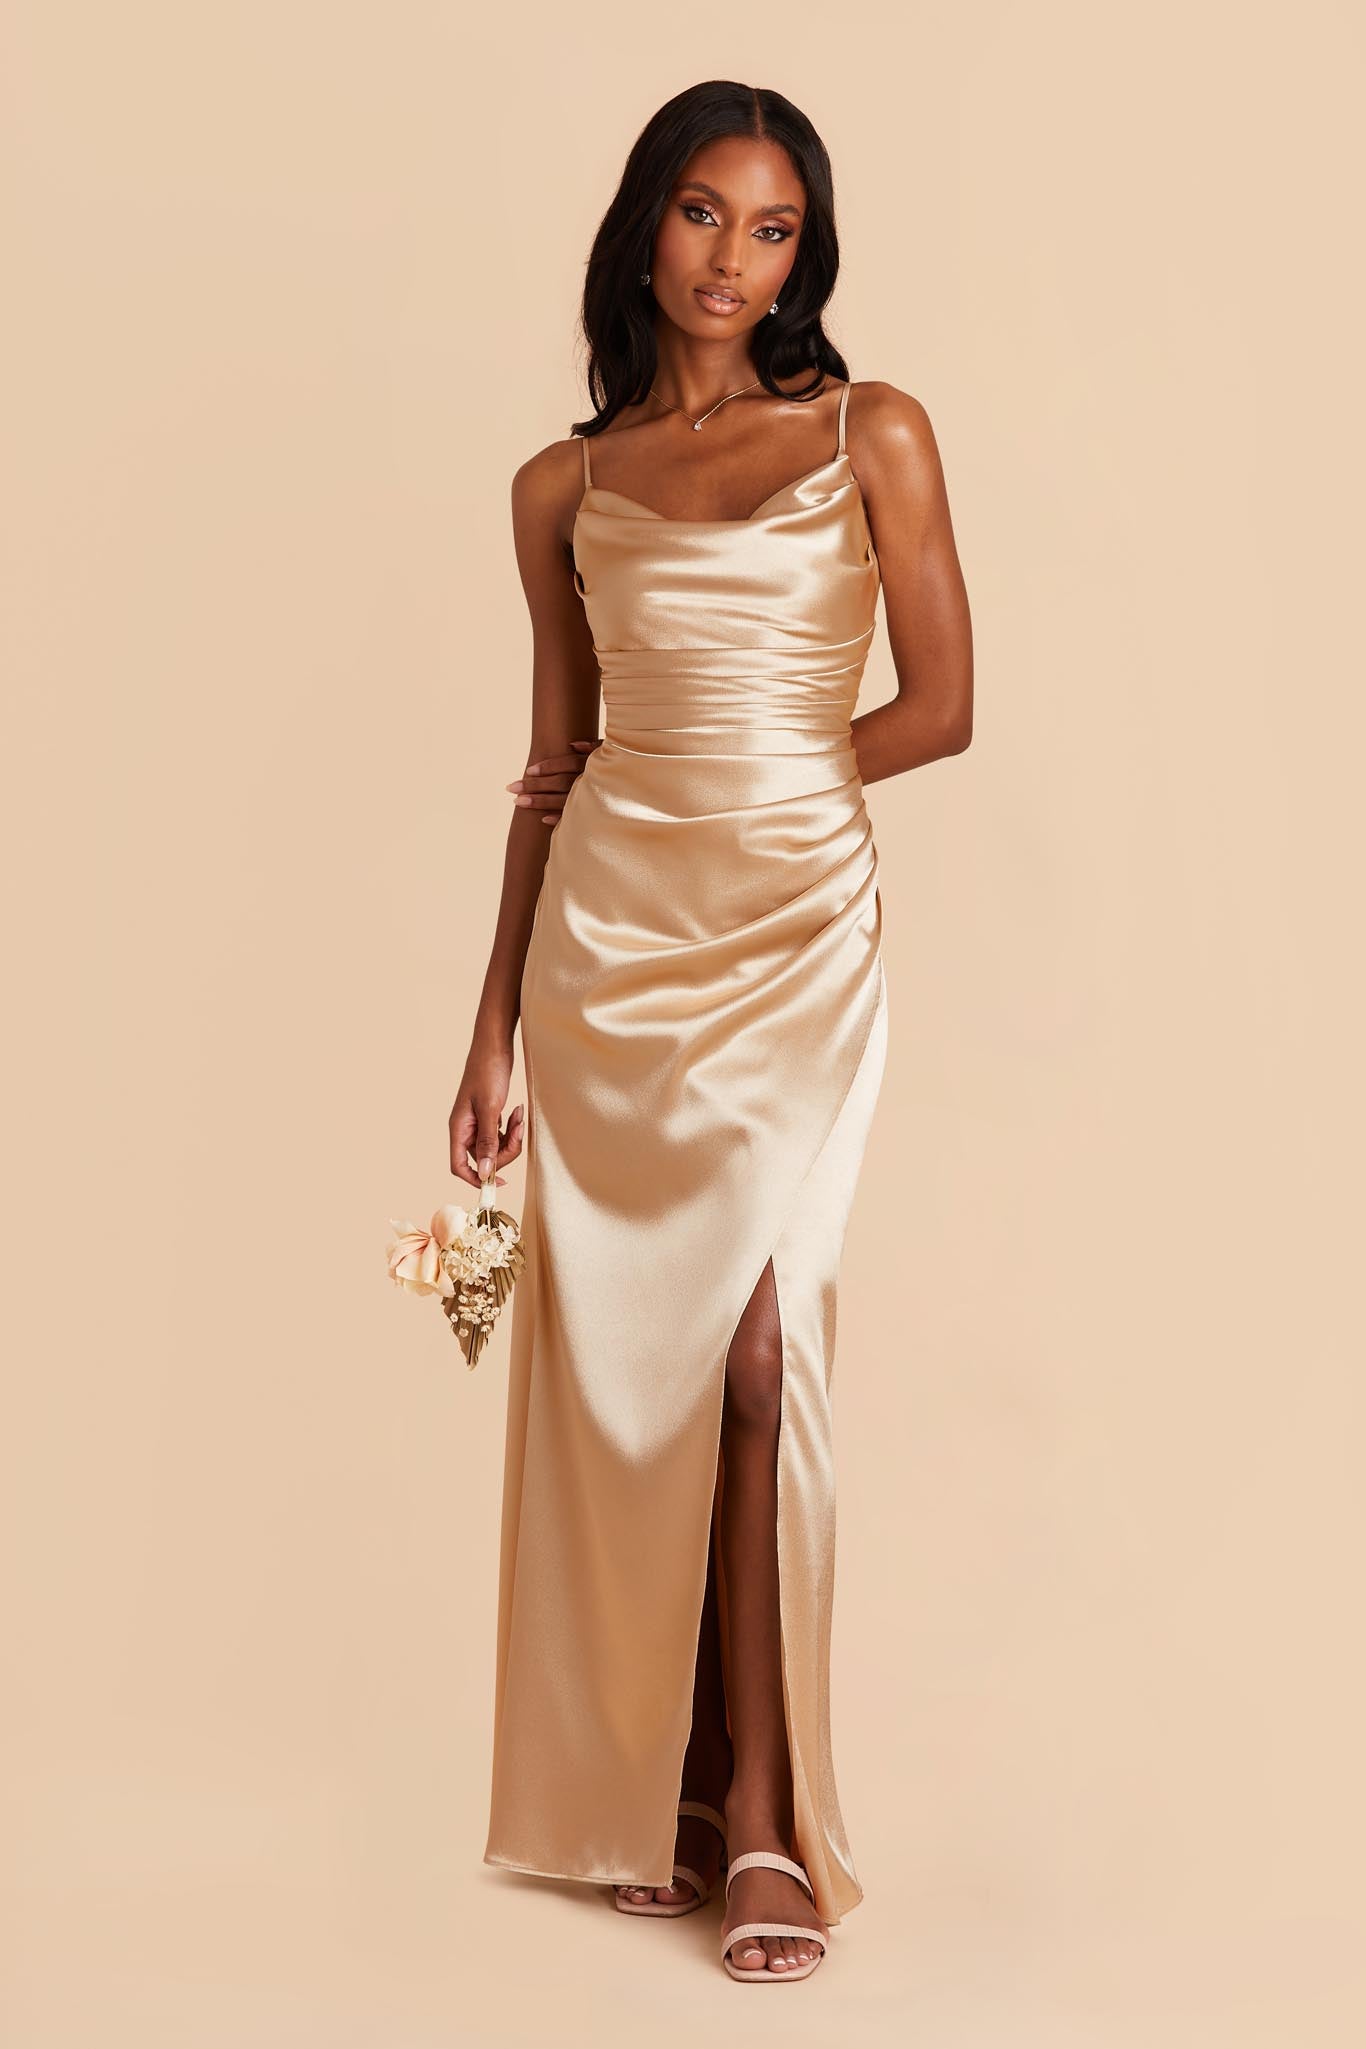 gold dresses for bridesmaids